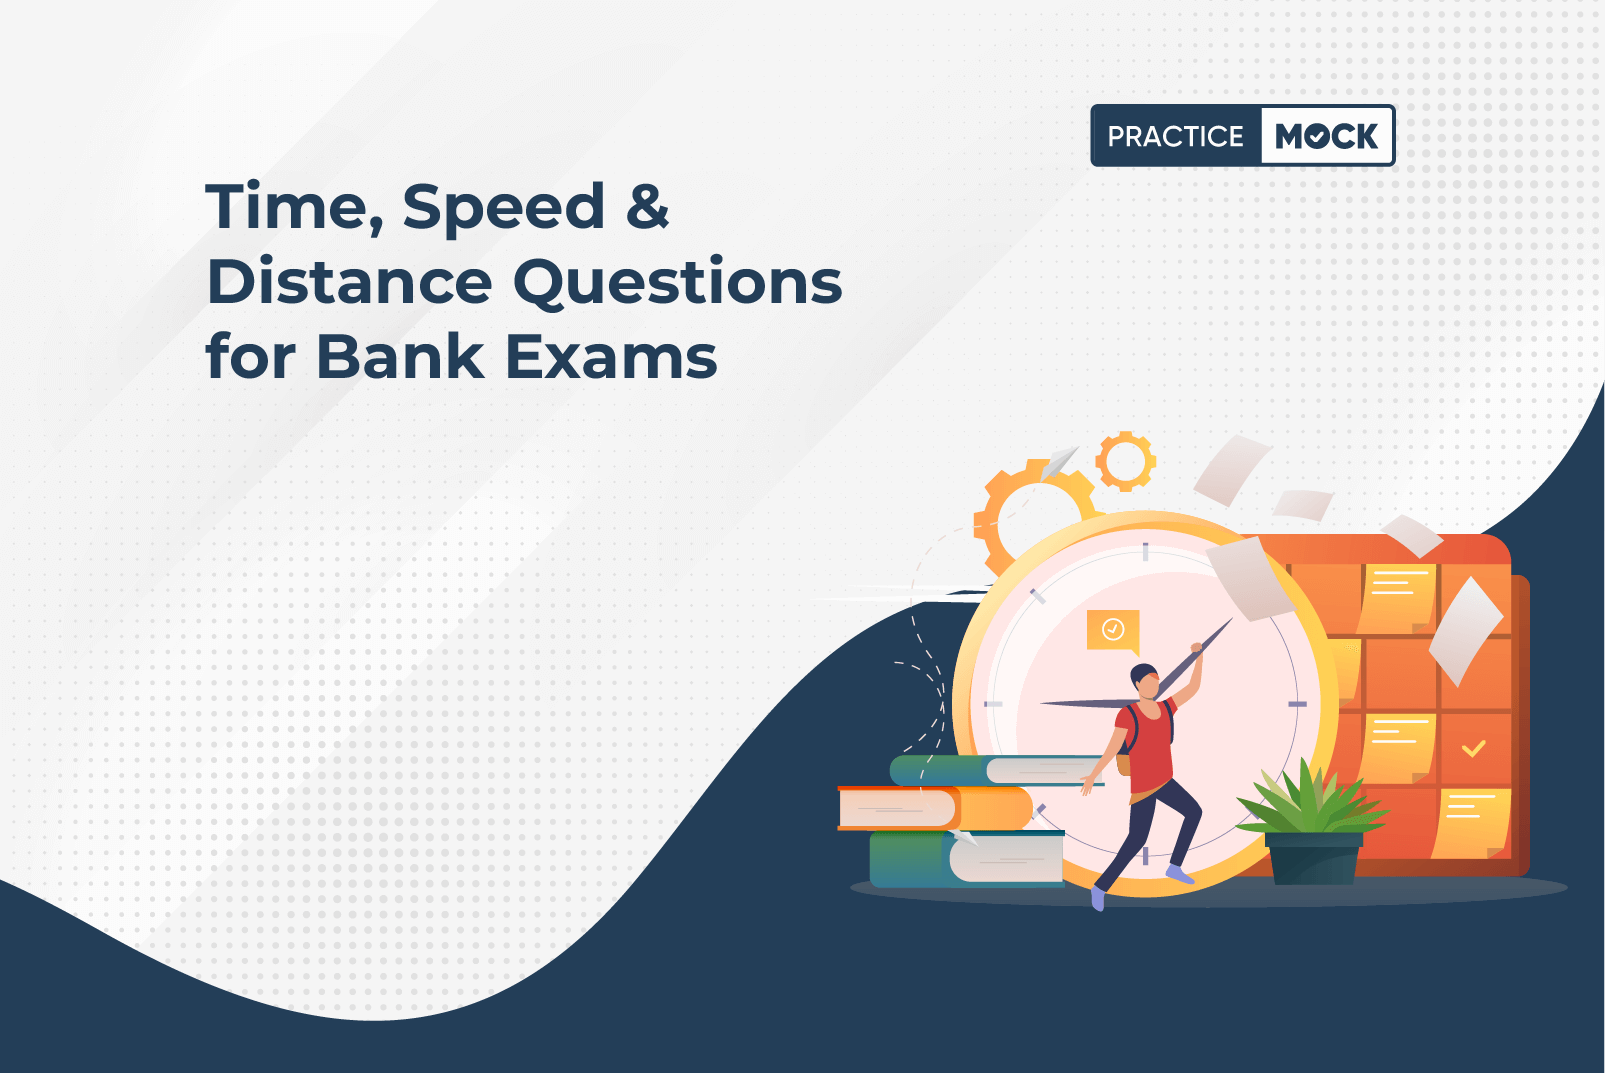 Time, Speed & Distance Questions for Bank Exams